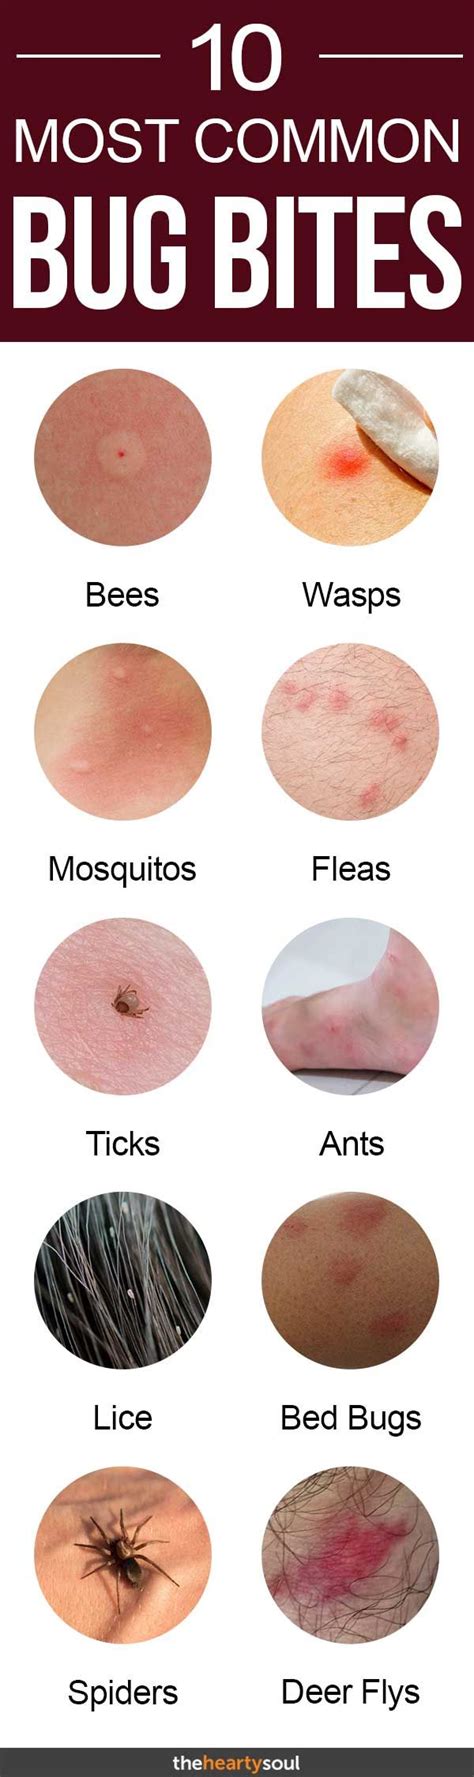 Bug Bites Anyone Should Be Able To Identify Bug Bites Insect Bites Health And Beauty Tips